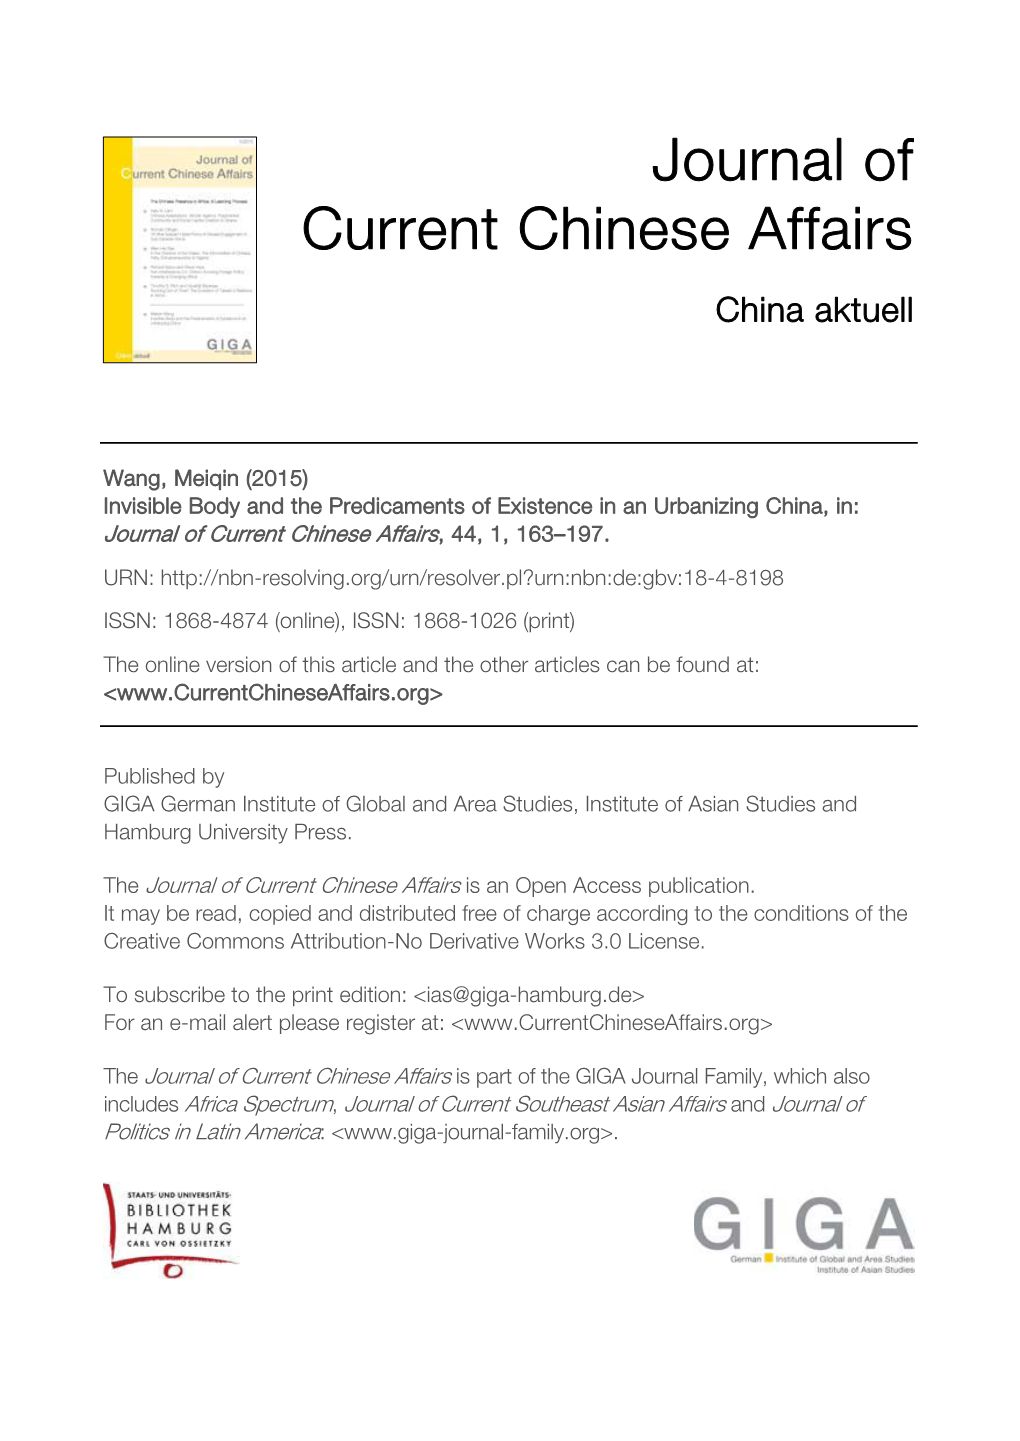 Invisible Body and the Predicaments of Existence in an Urbanizing China, In: Journal of Current Chinese Affairs, 44, 1, 163–197